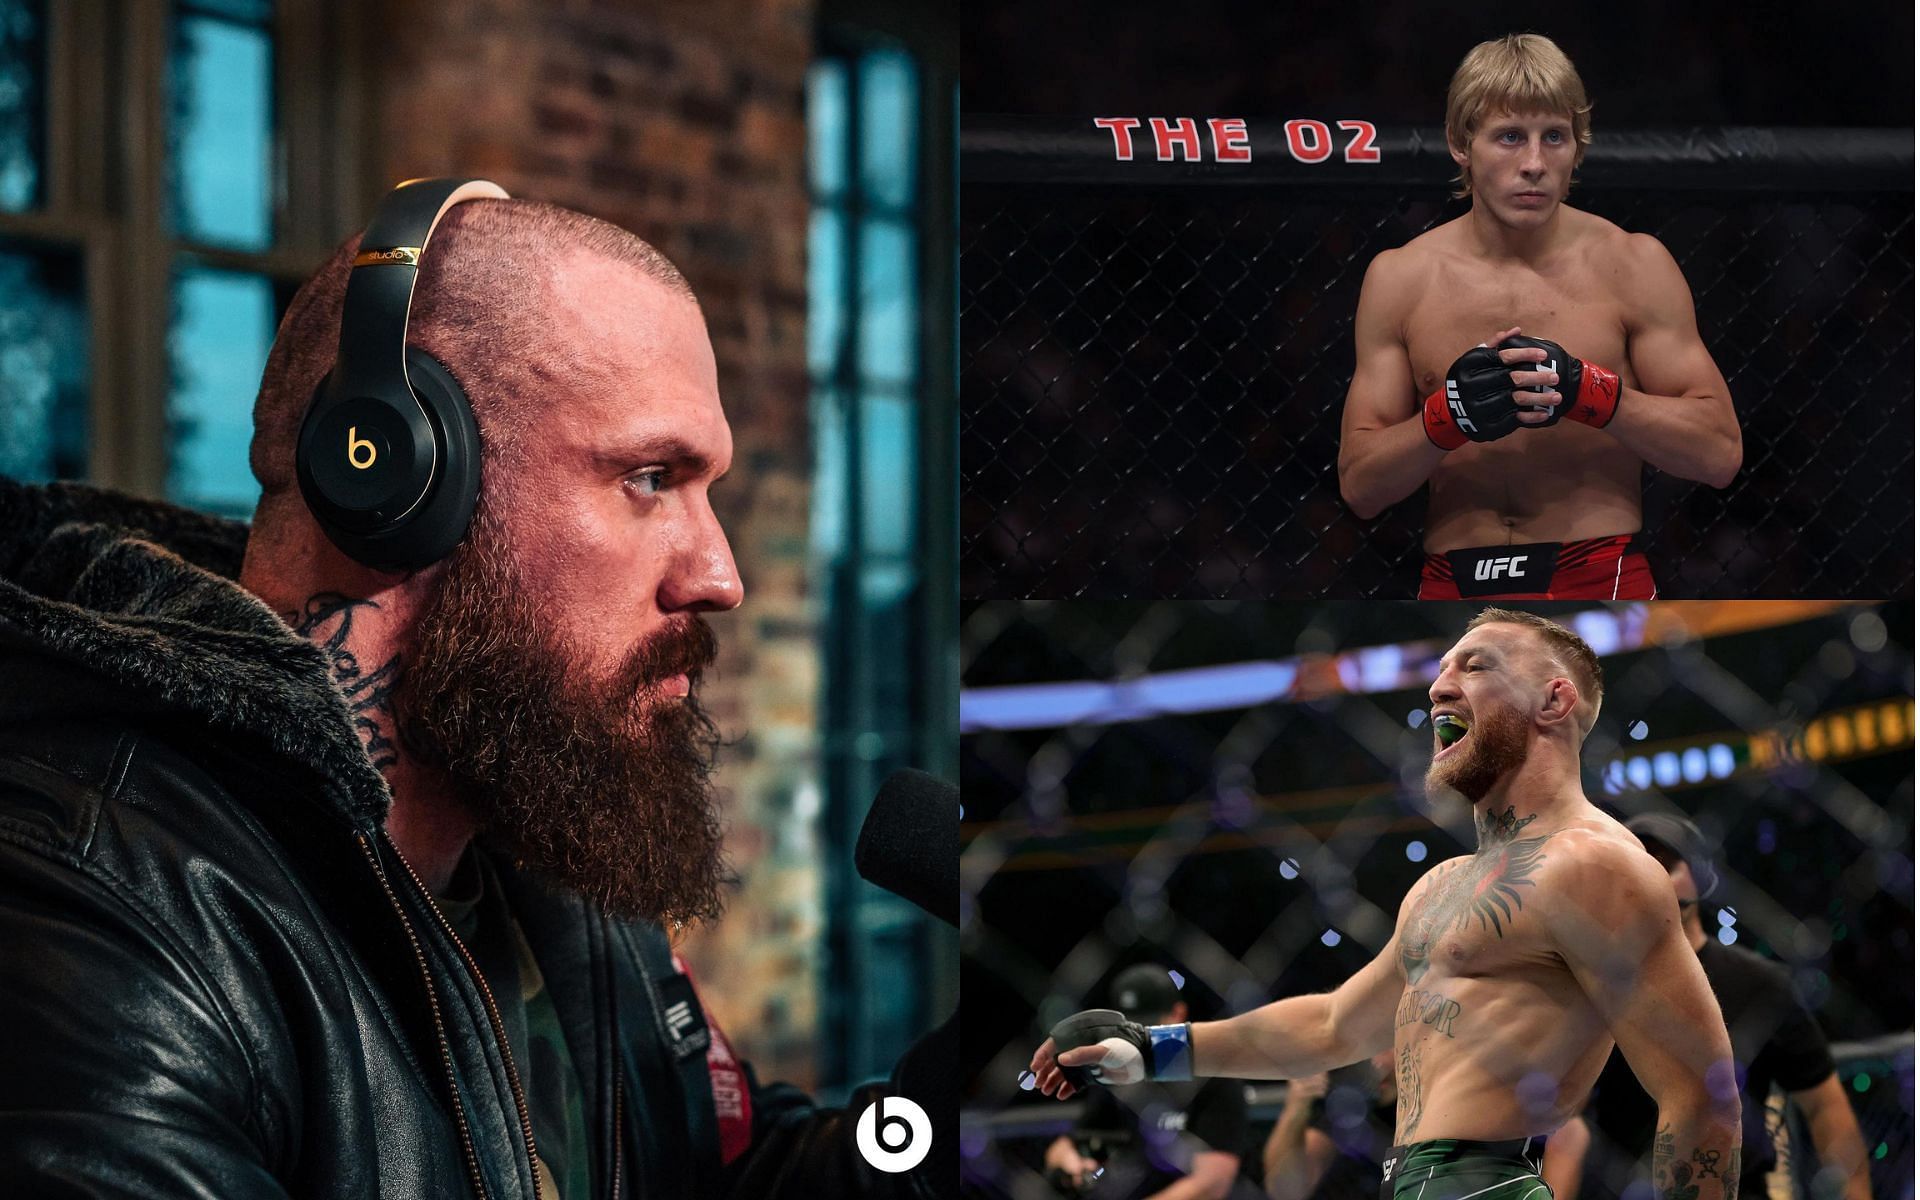 True Geordie (Left), Paddy Pimblett (Top-Right), and Conor McGregor (Bottom-Right) (Images courtesy of @truegeordieofficial Instagram and Getty)